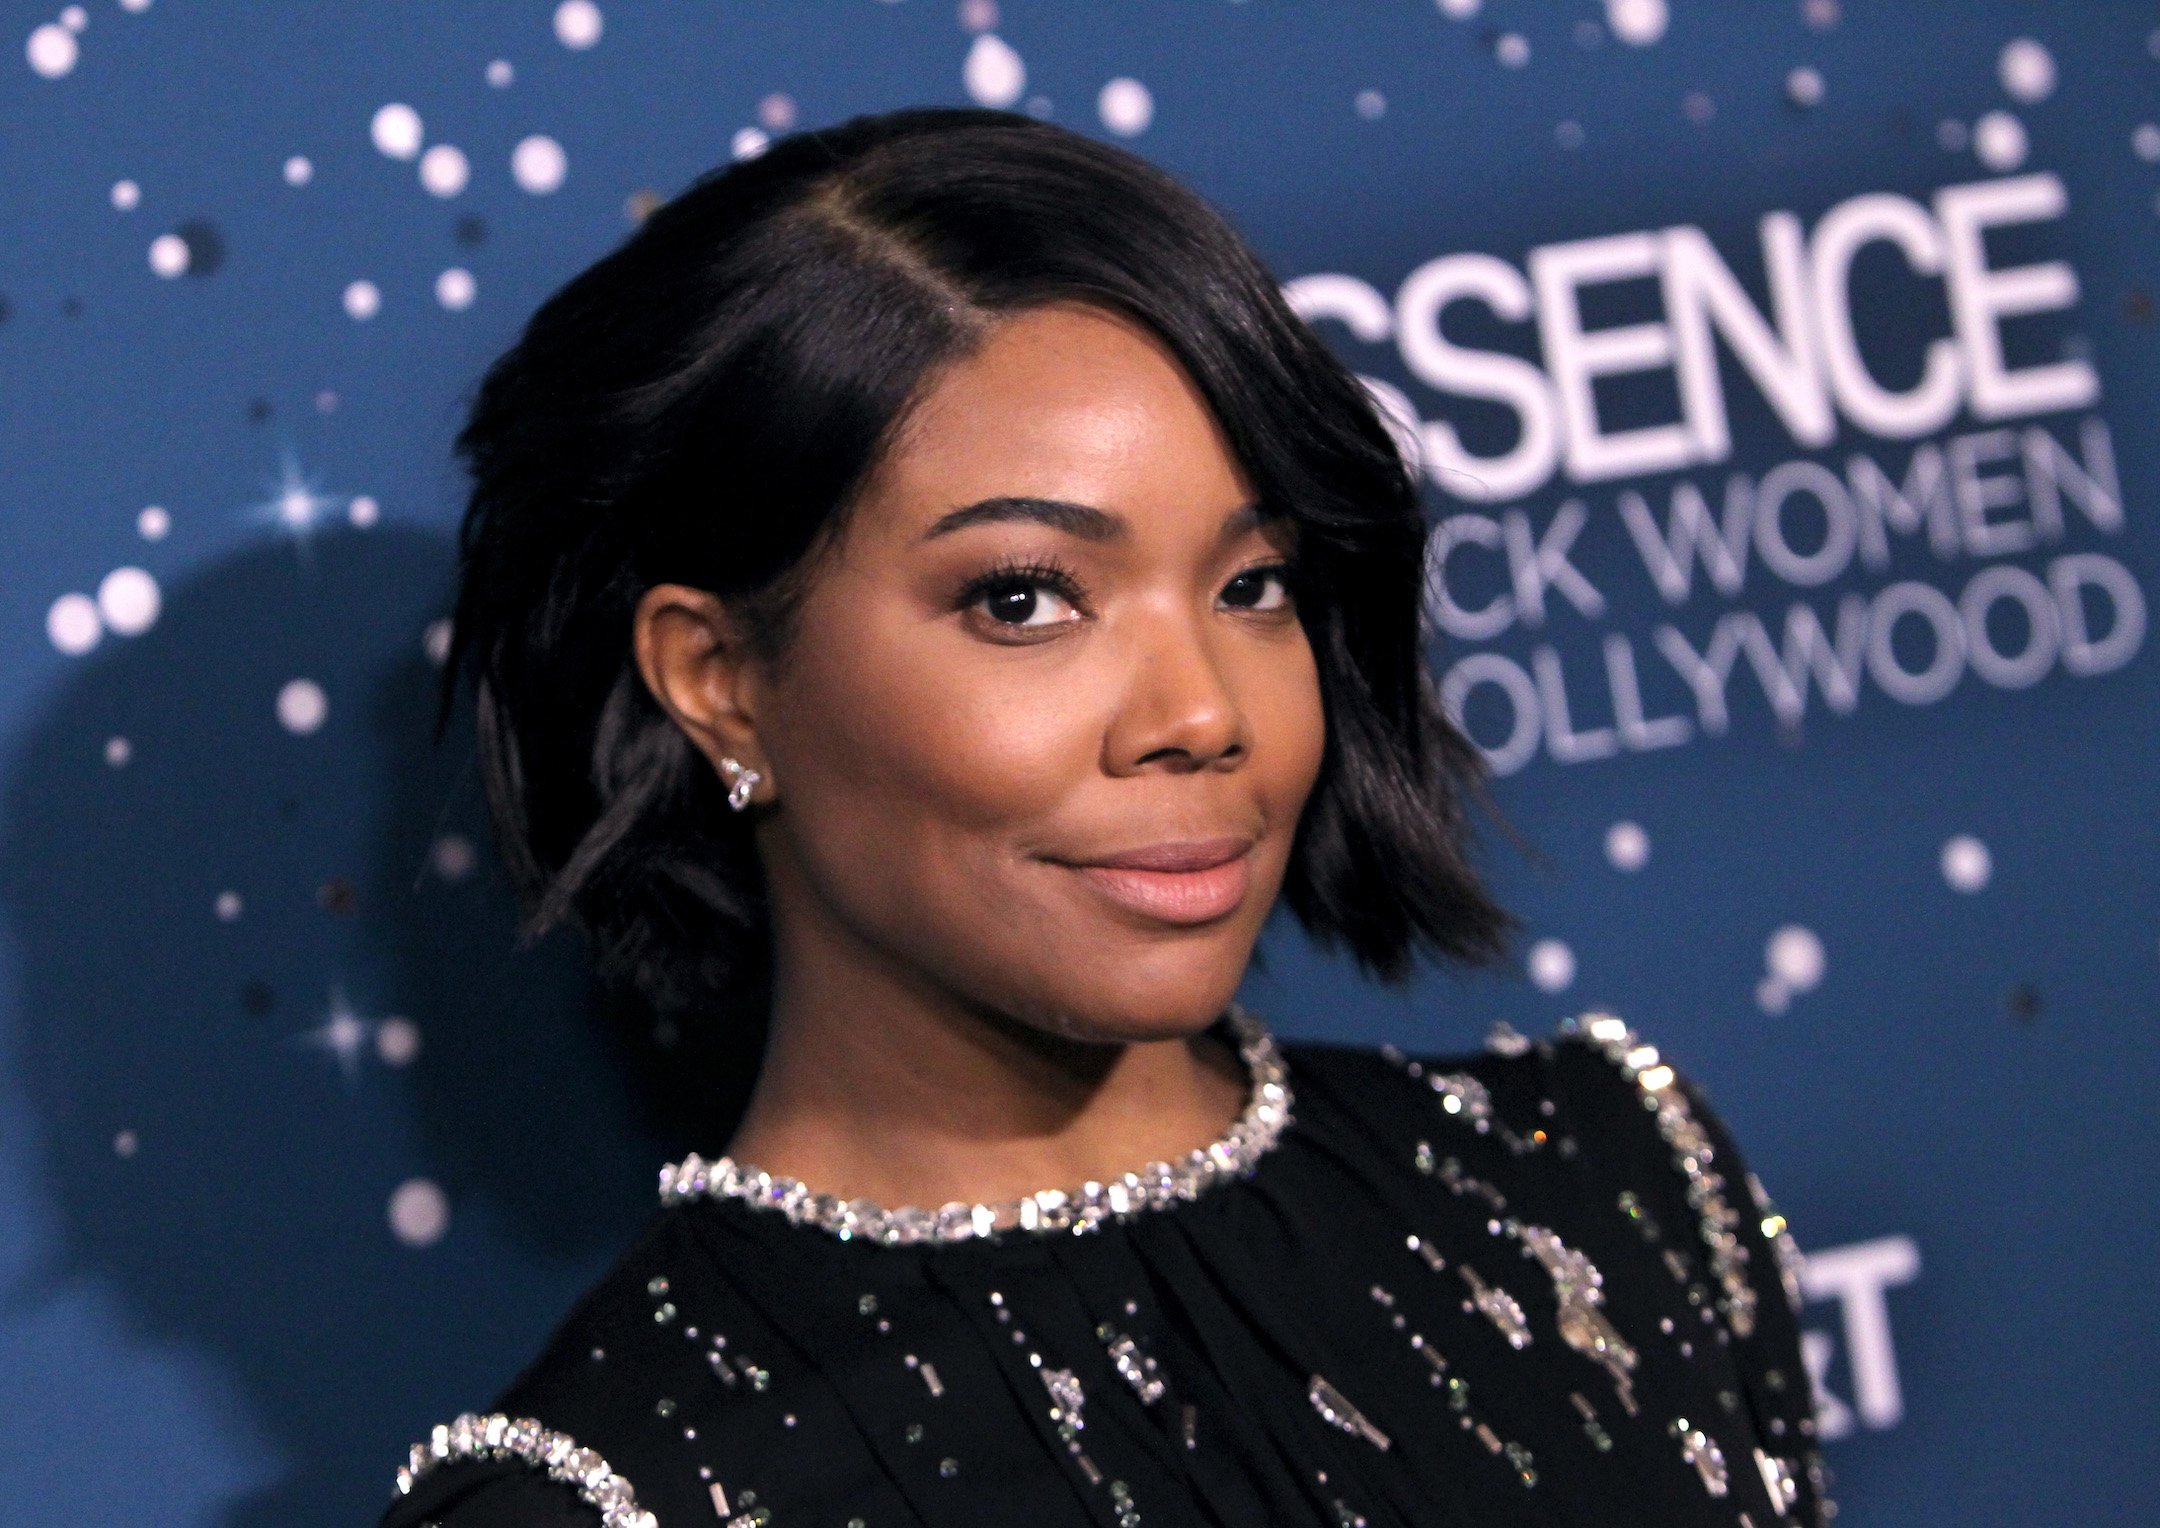 Gabrielle Union who starred in The Matrix smiles for the cameras